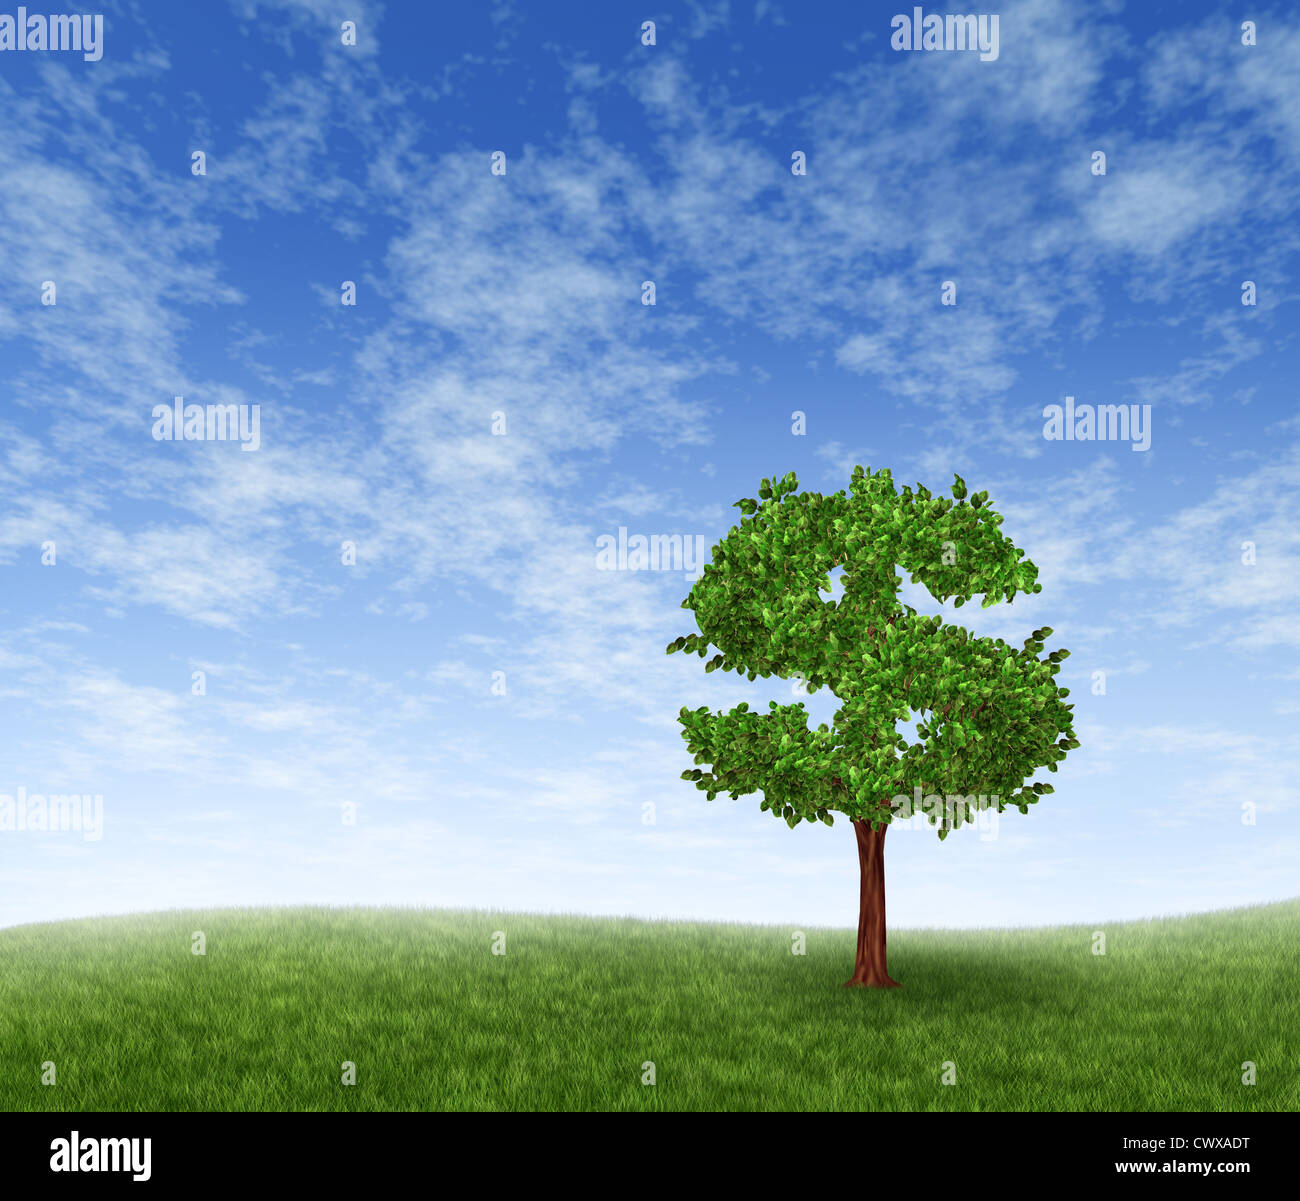 Financial growth and success on a green summer landscape with a single tree in the shape of a dollar sign on a rolling grass hill with a blue sky with clouds showing a business concept of growing prosperity and investments. Stock Photo